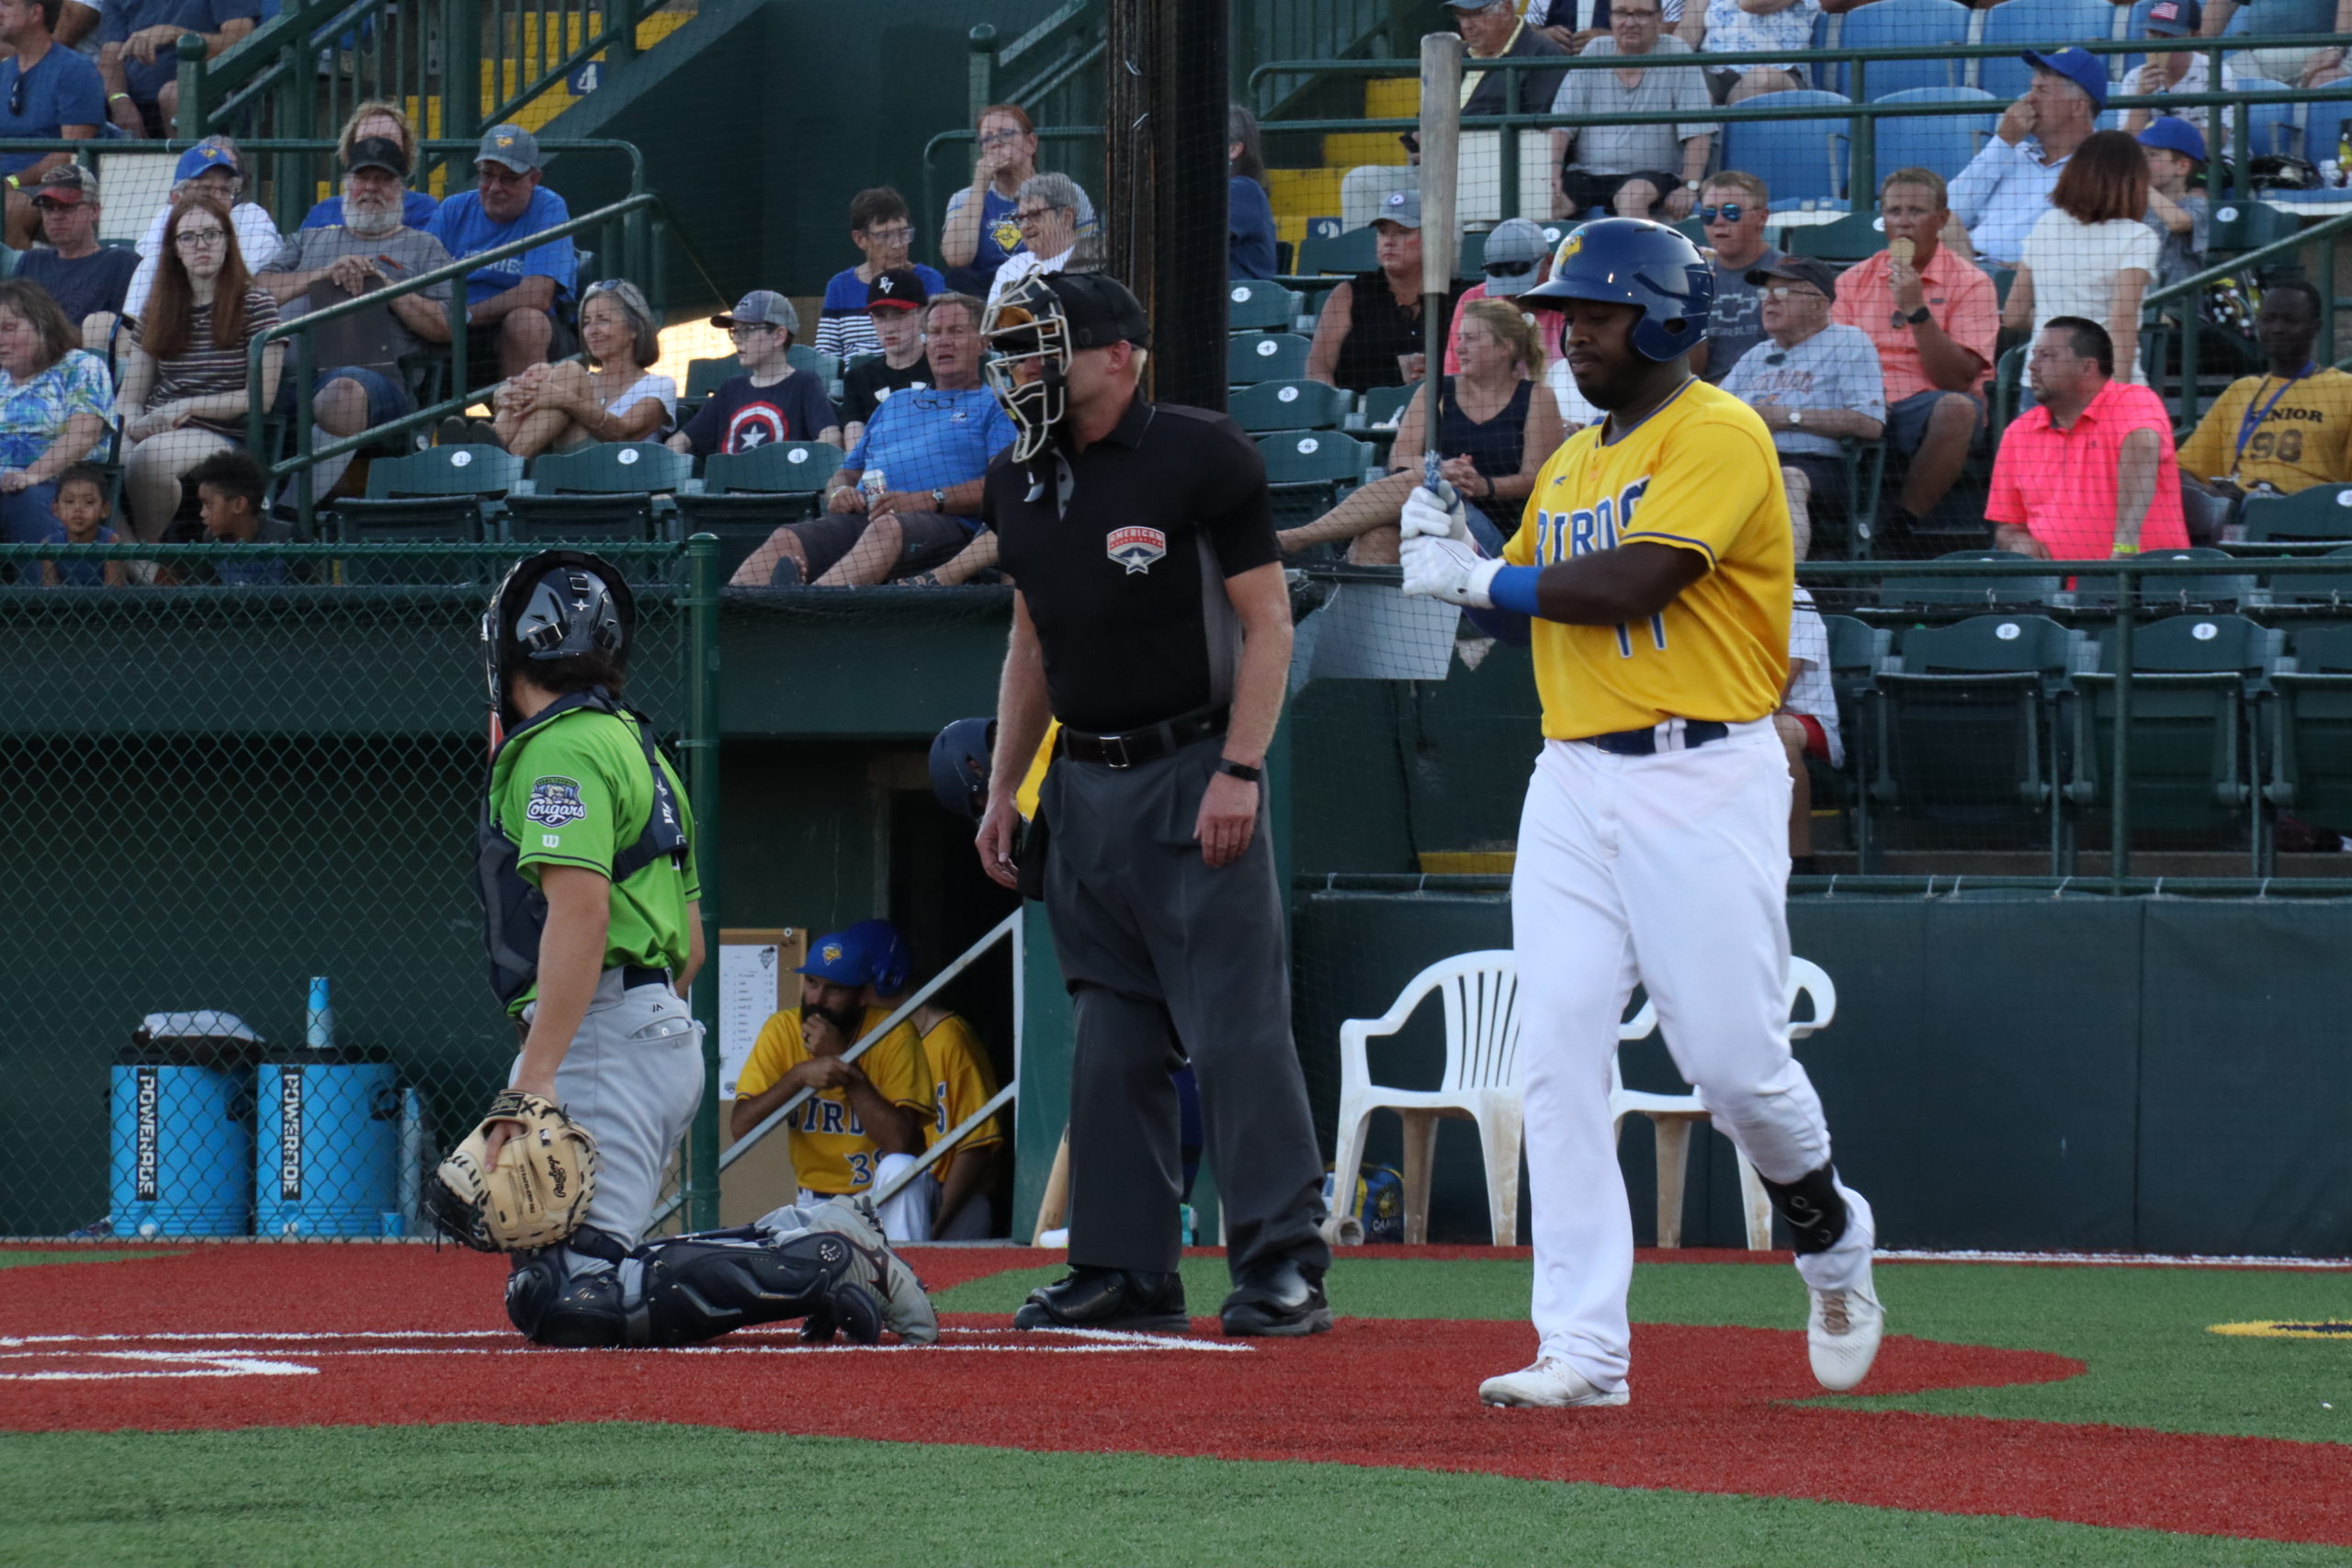 HENRY TIES FRANCHISE HITS RECORD AS BIRDS WRAP UP 2022 SEASON Sioux